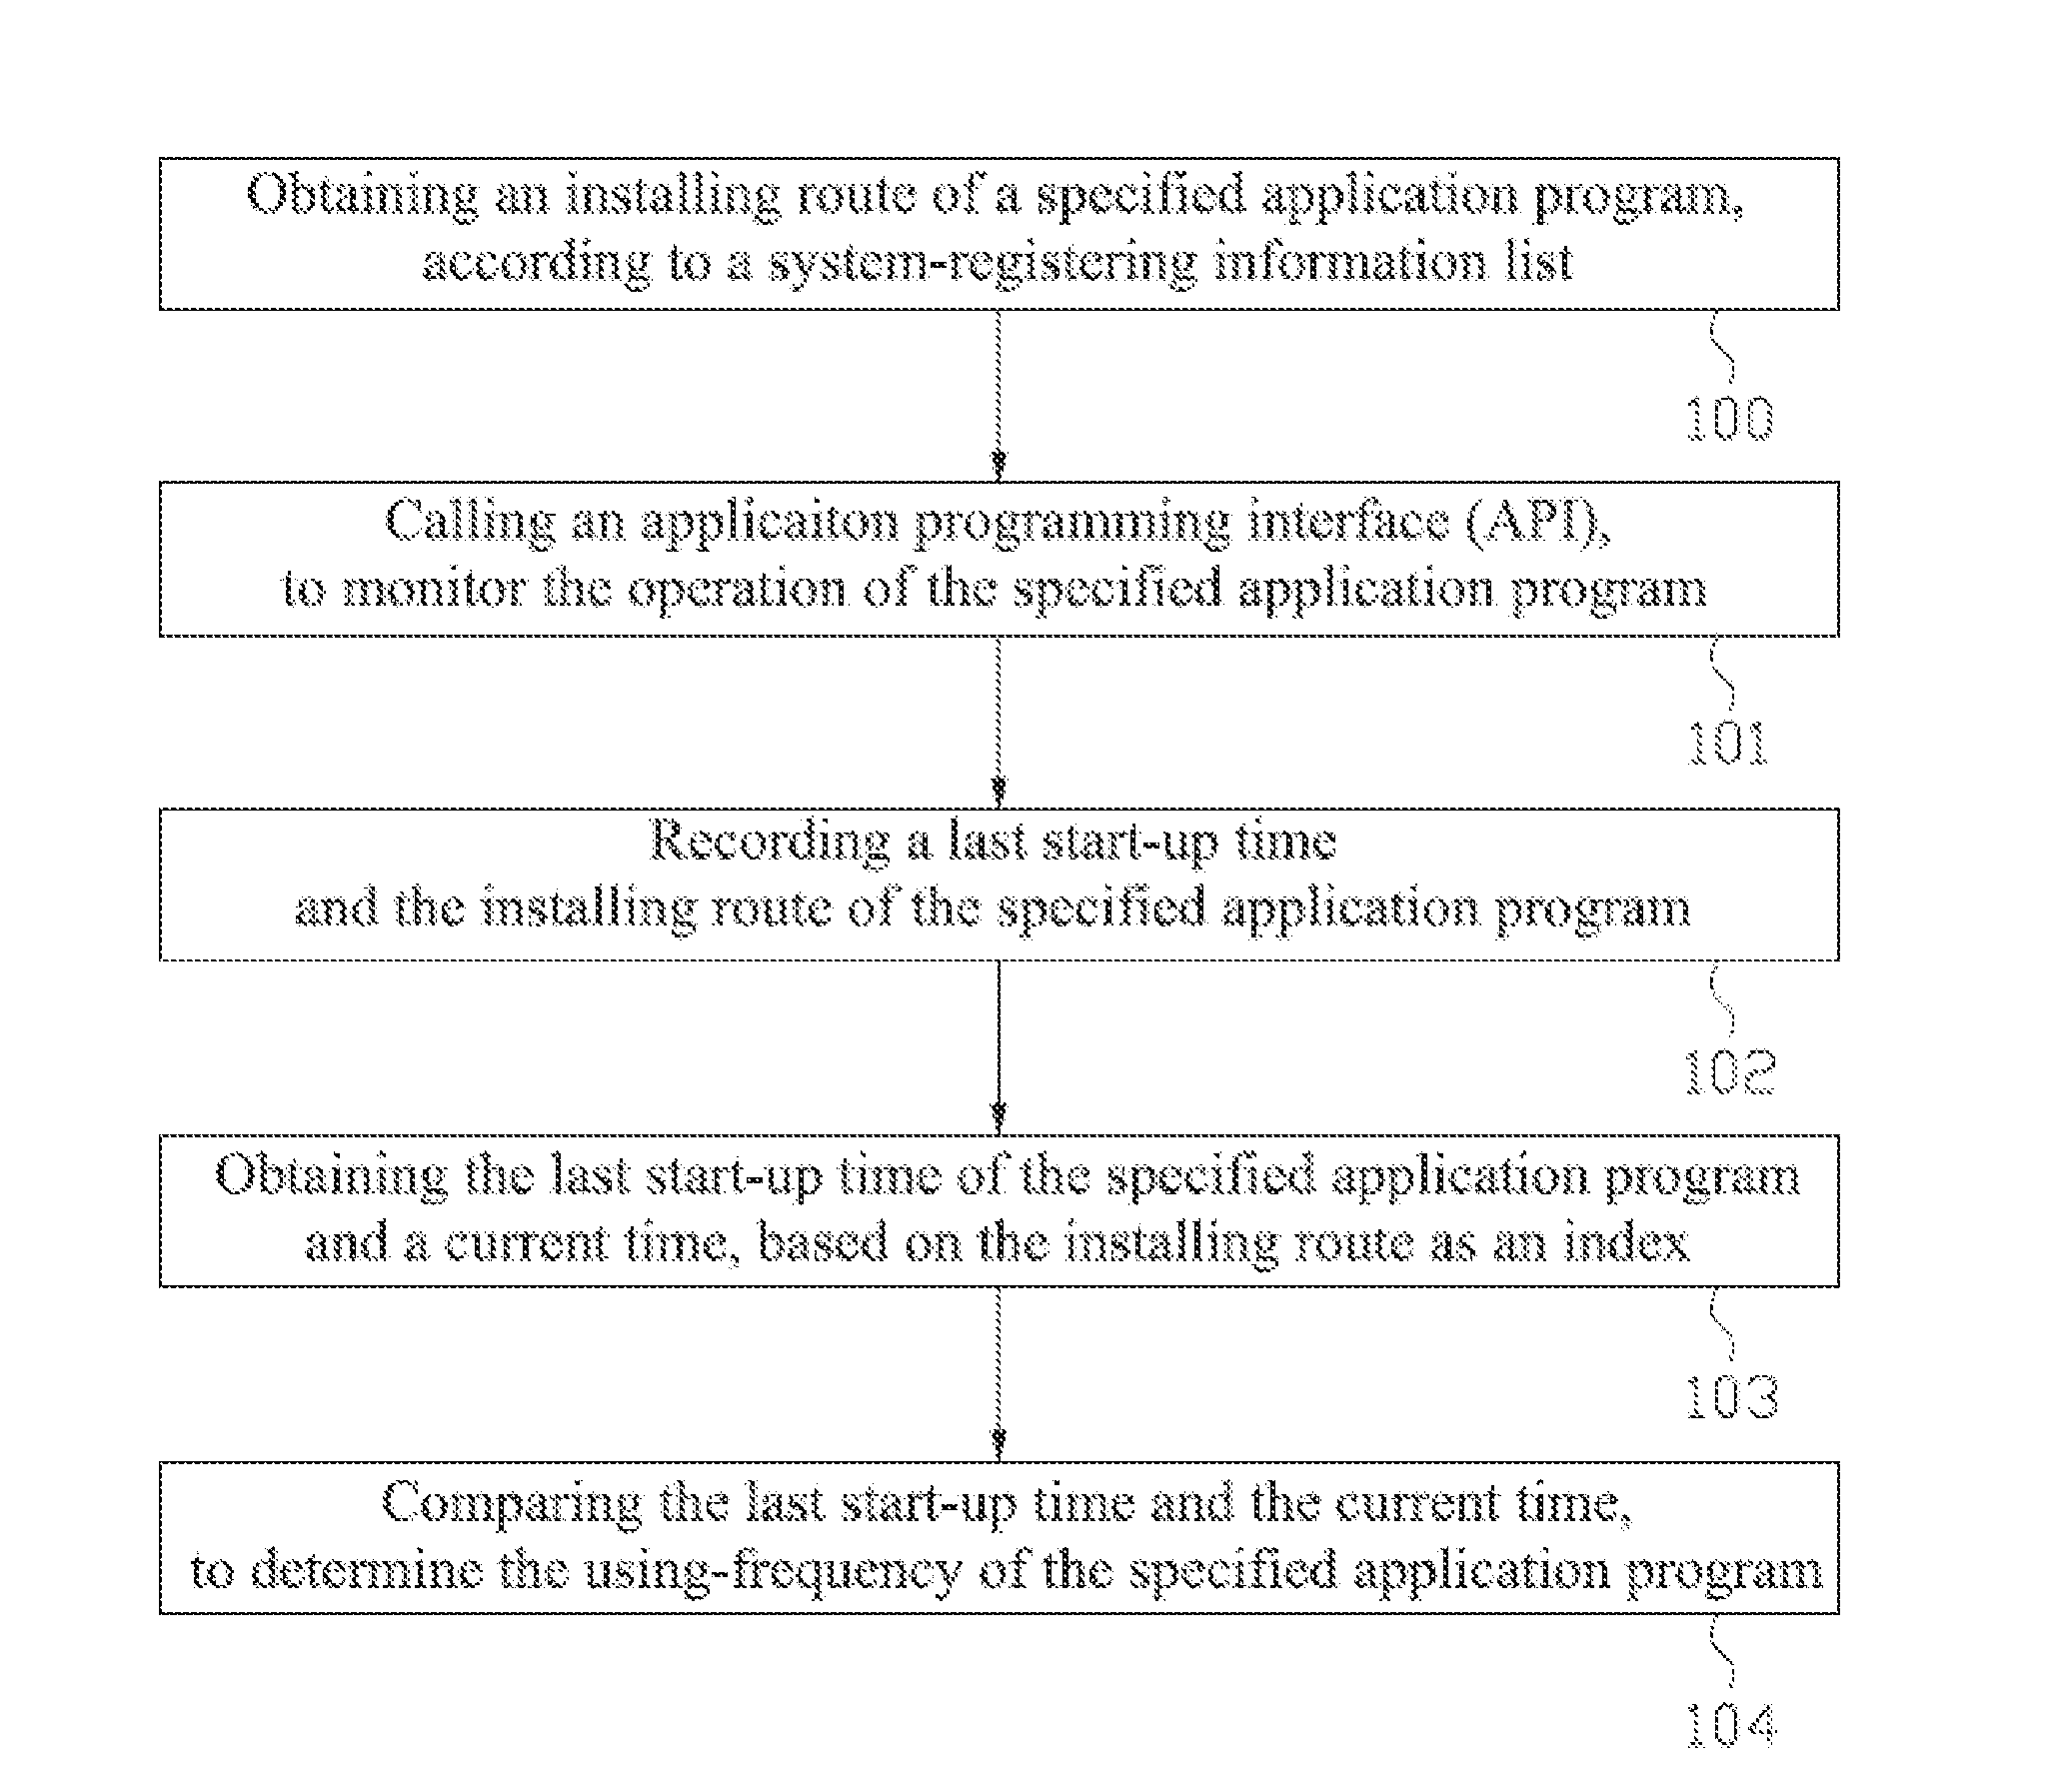 Method and Device for Obtaining Using-Frequency of Application Program